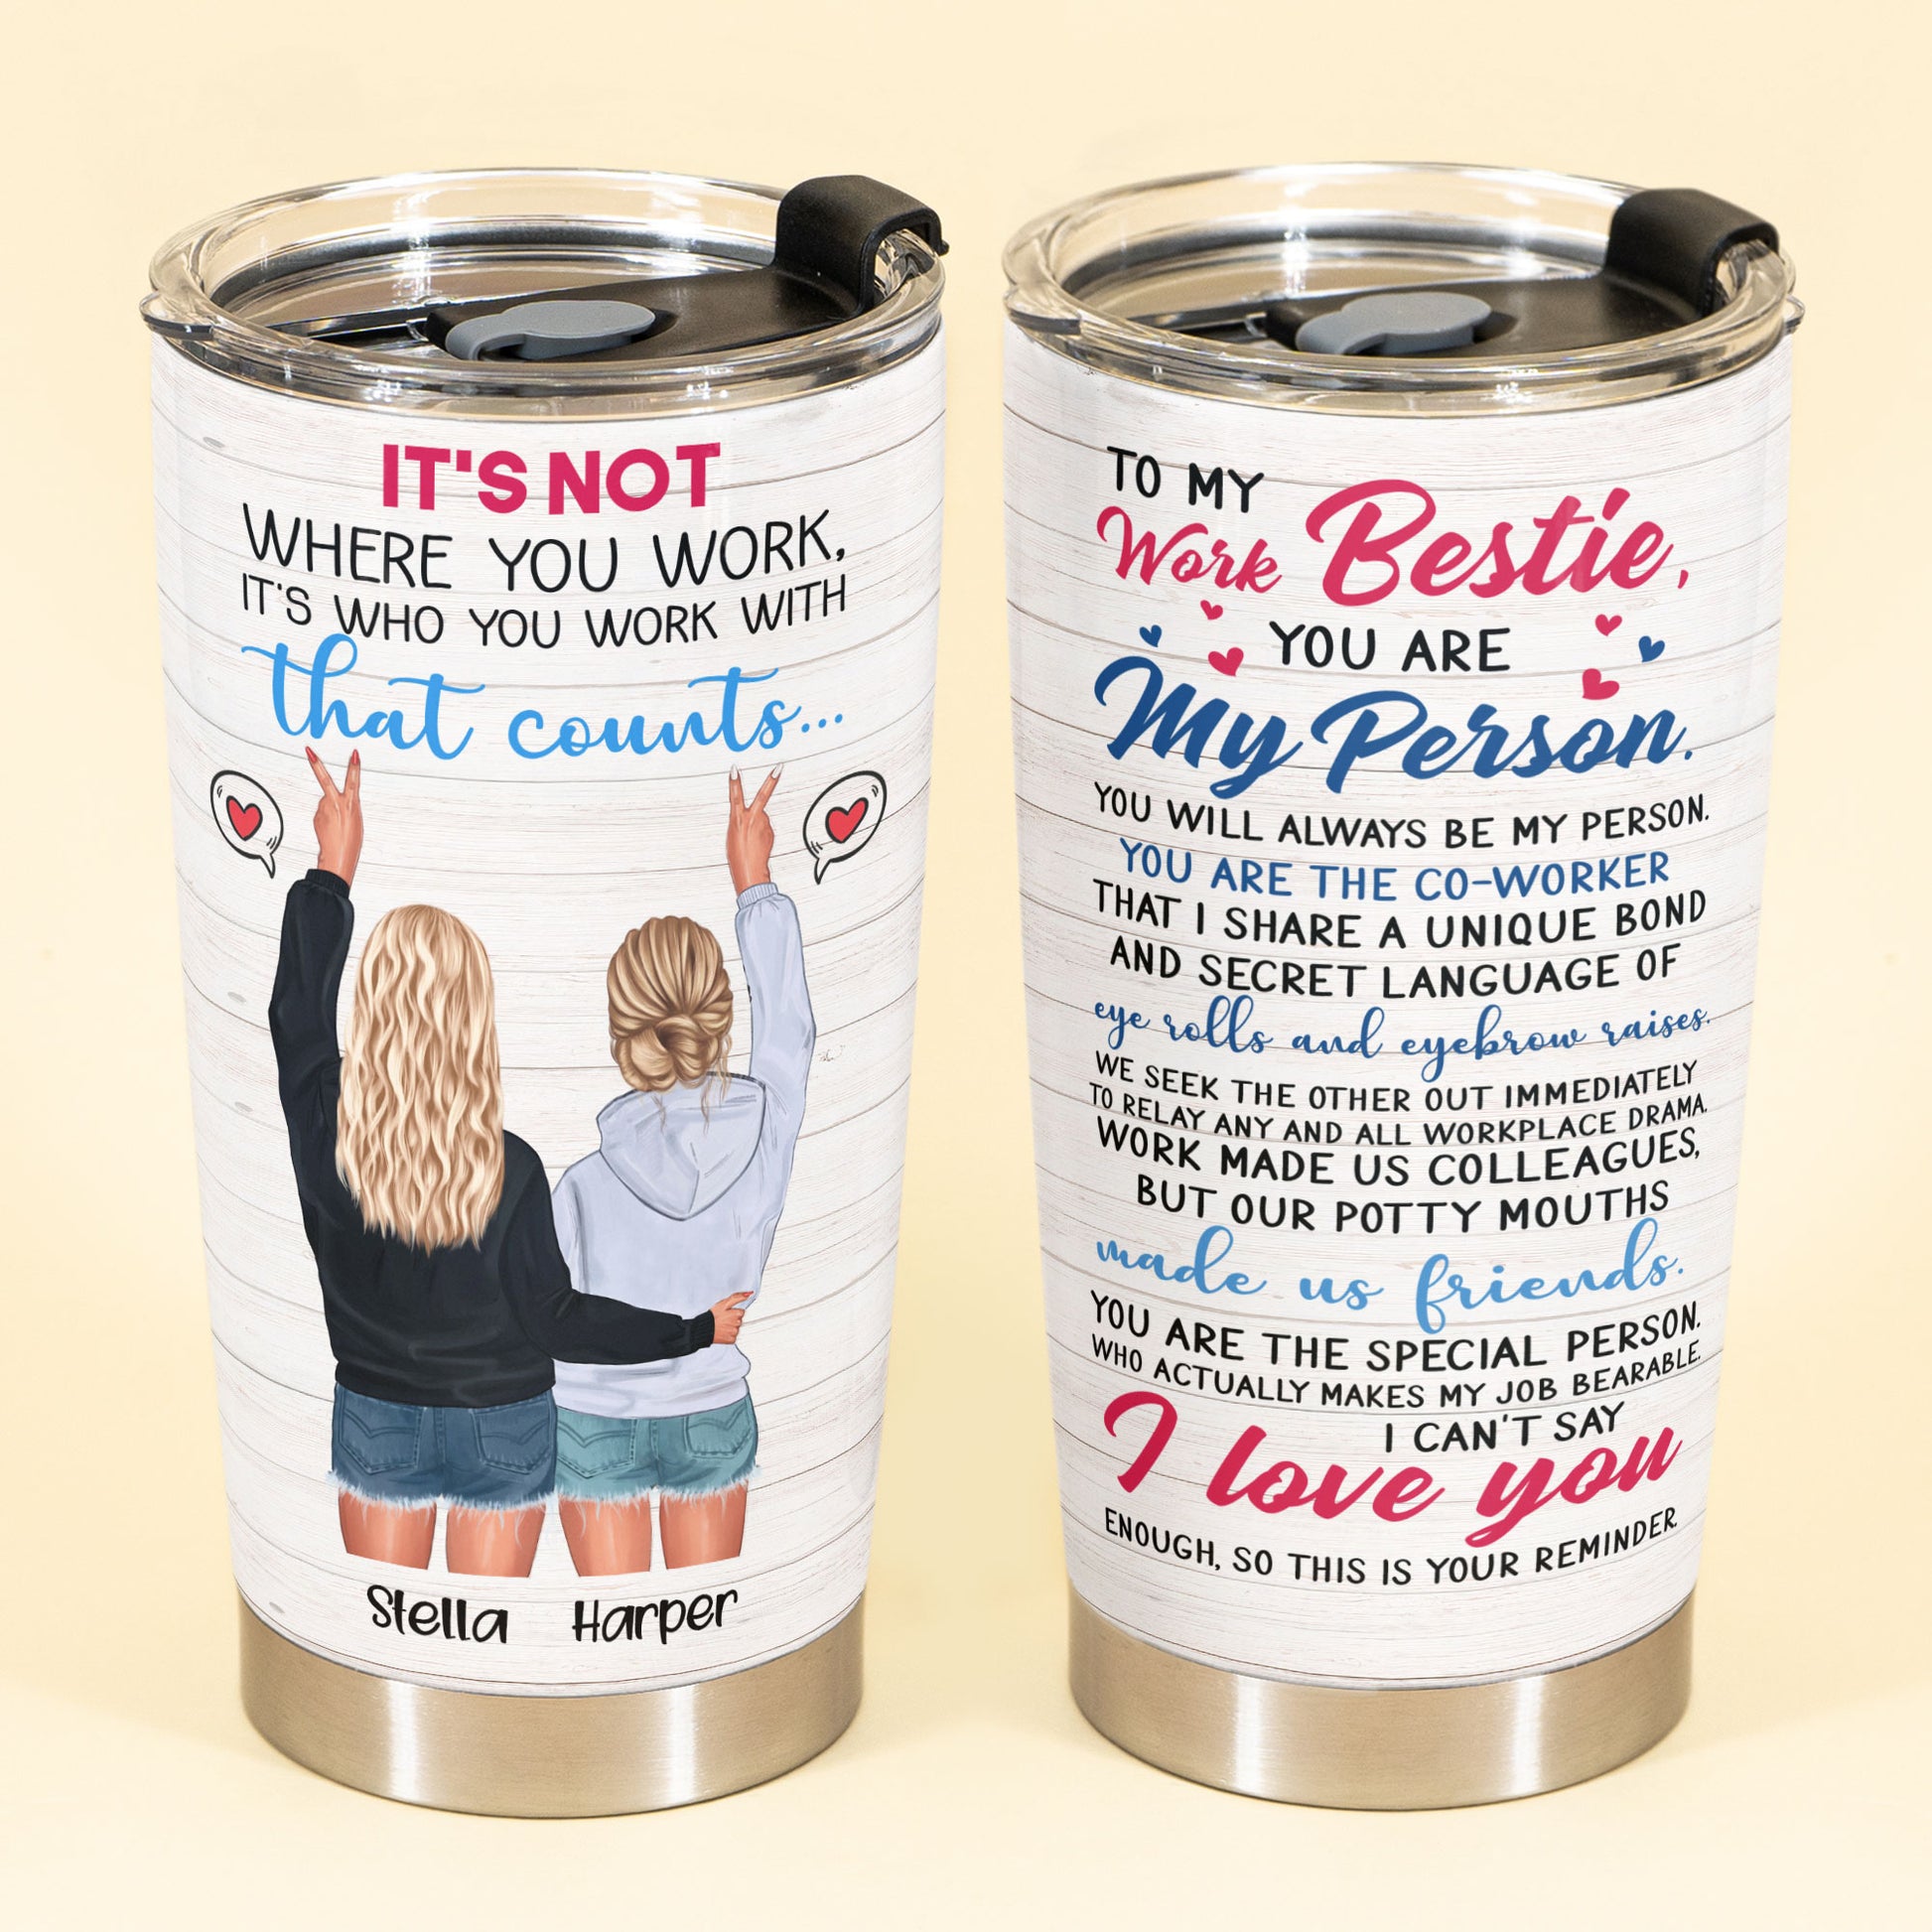 To My Work Bestie - Personalized Tumbler - Gift For Work Besties, Colleagues, Friends, Best Friends